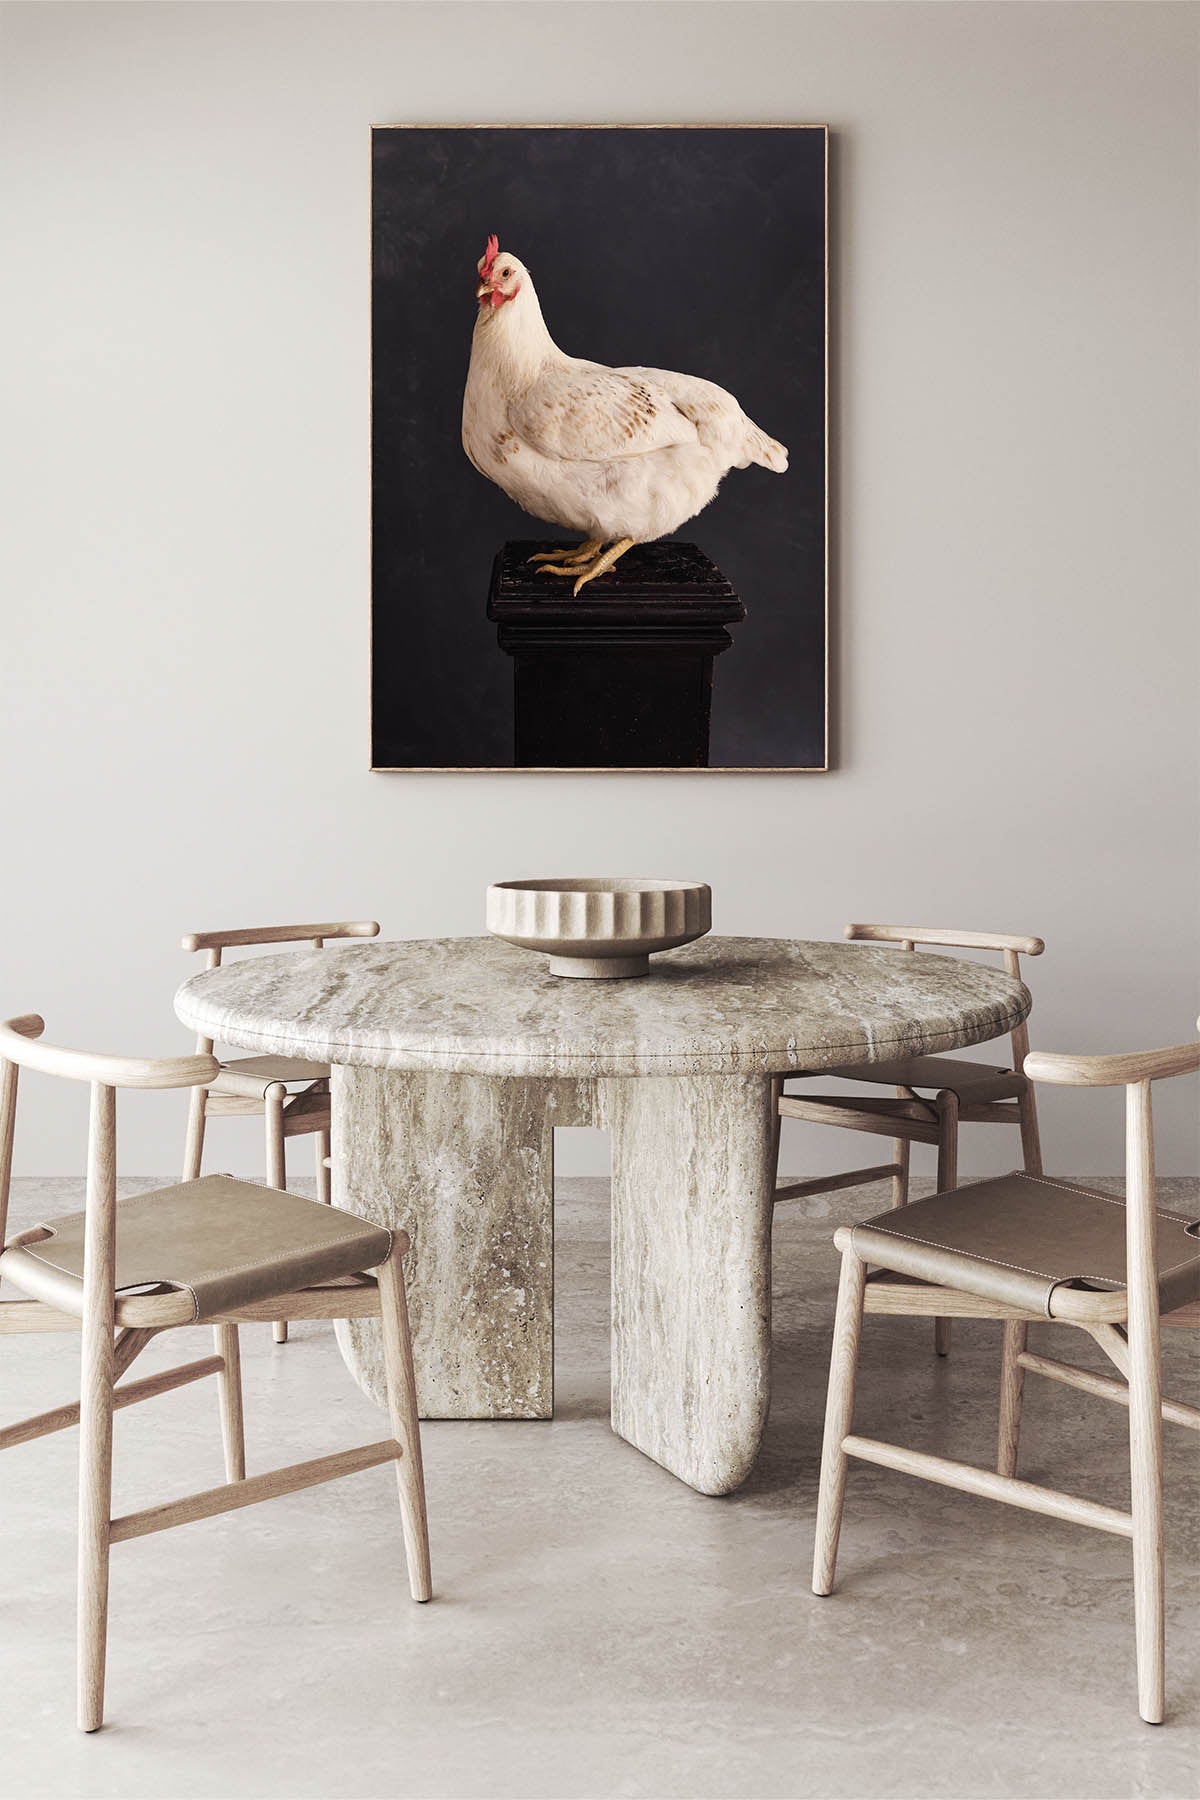 Fine Art Print Of A White Rose The Chicken Standing On A Black Plinth With A Black Background Framed On A Wall In An Modern Dutch Style Dining Room